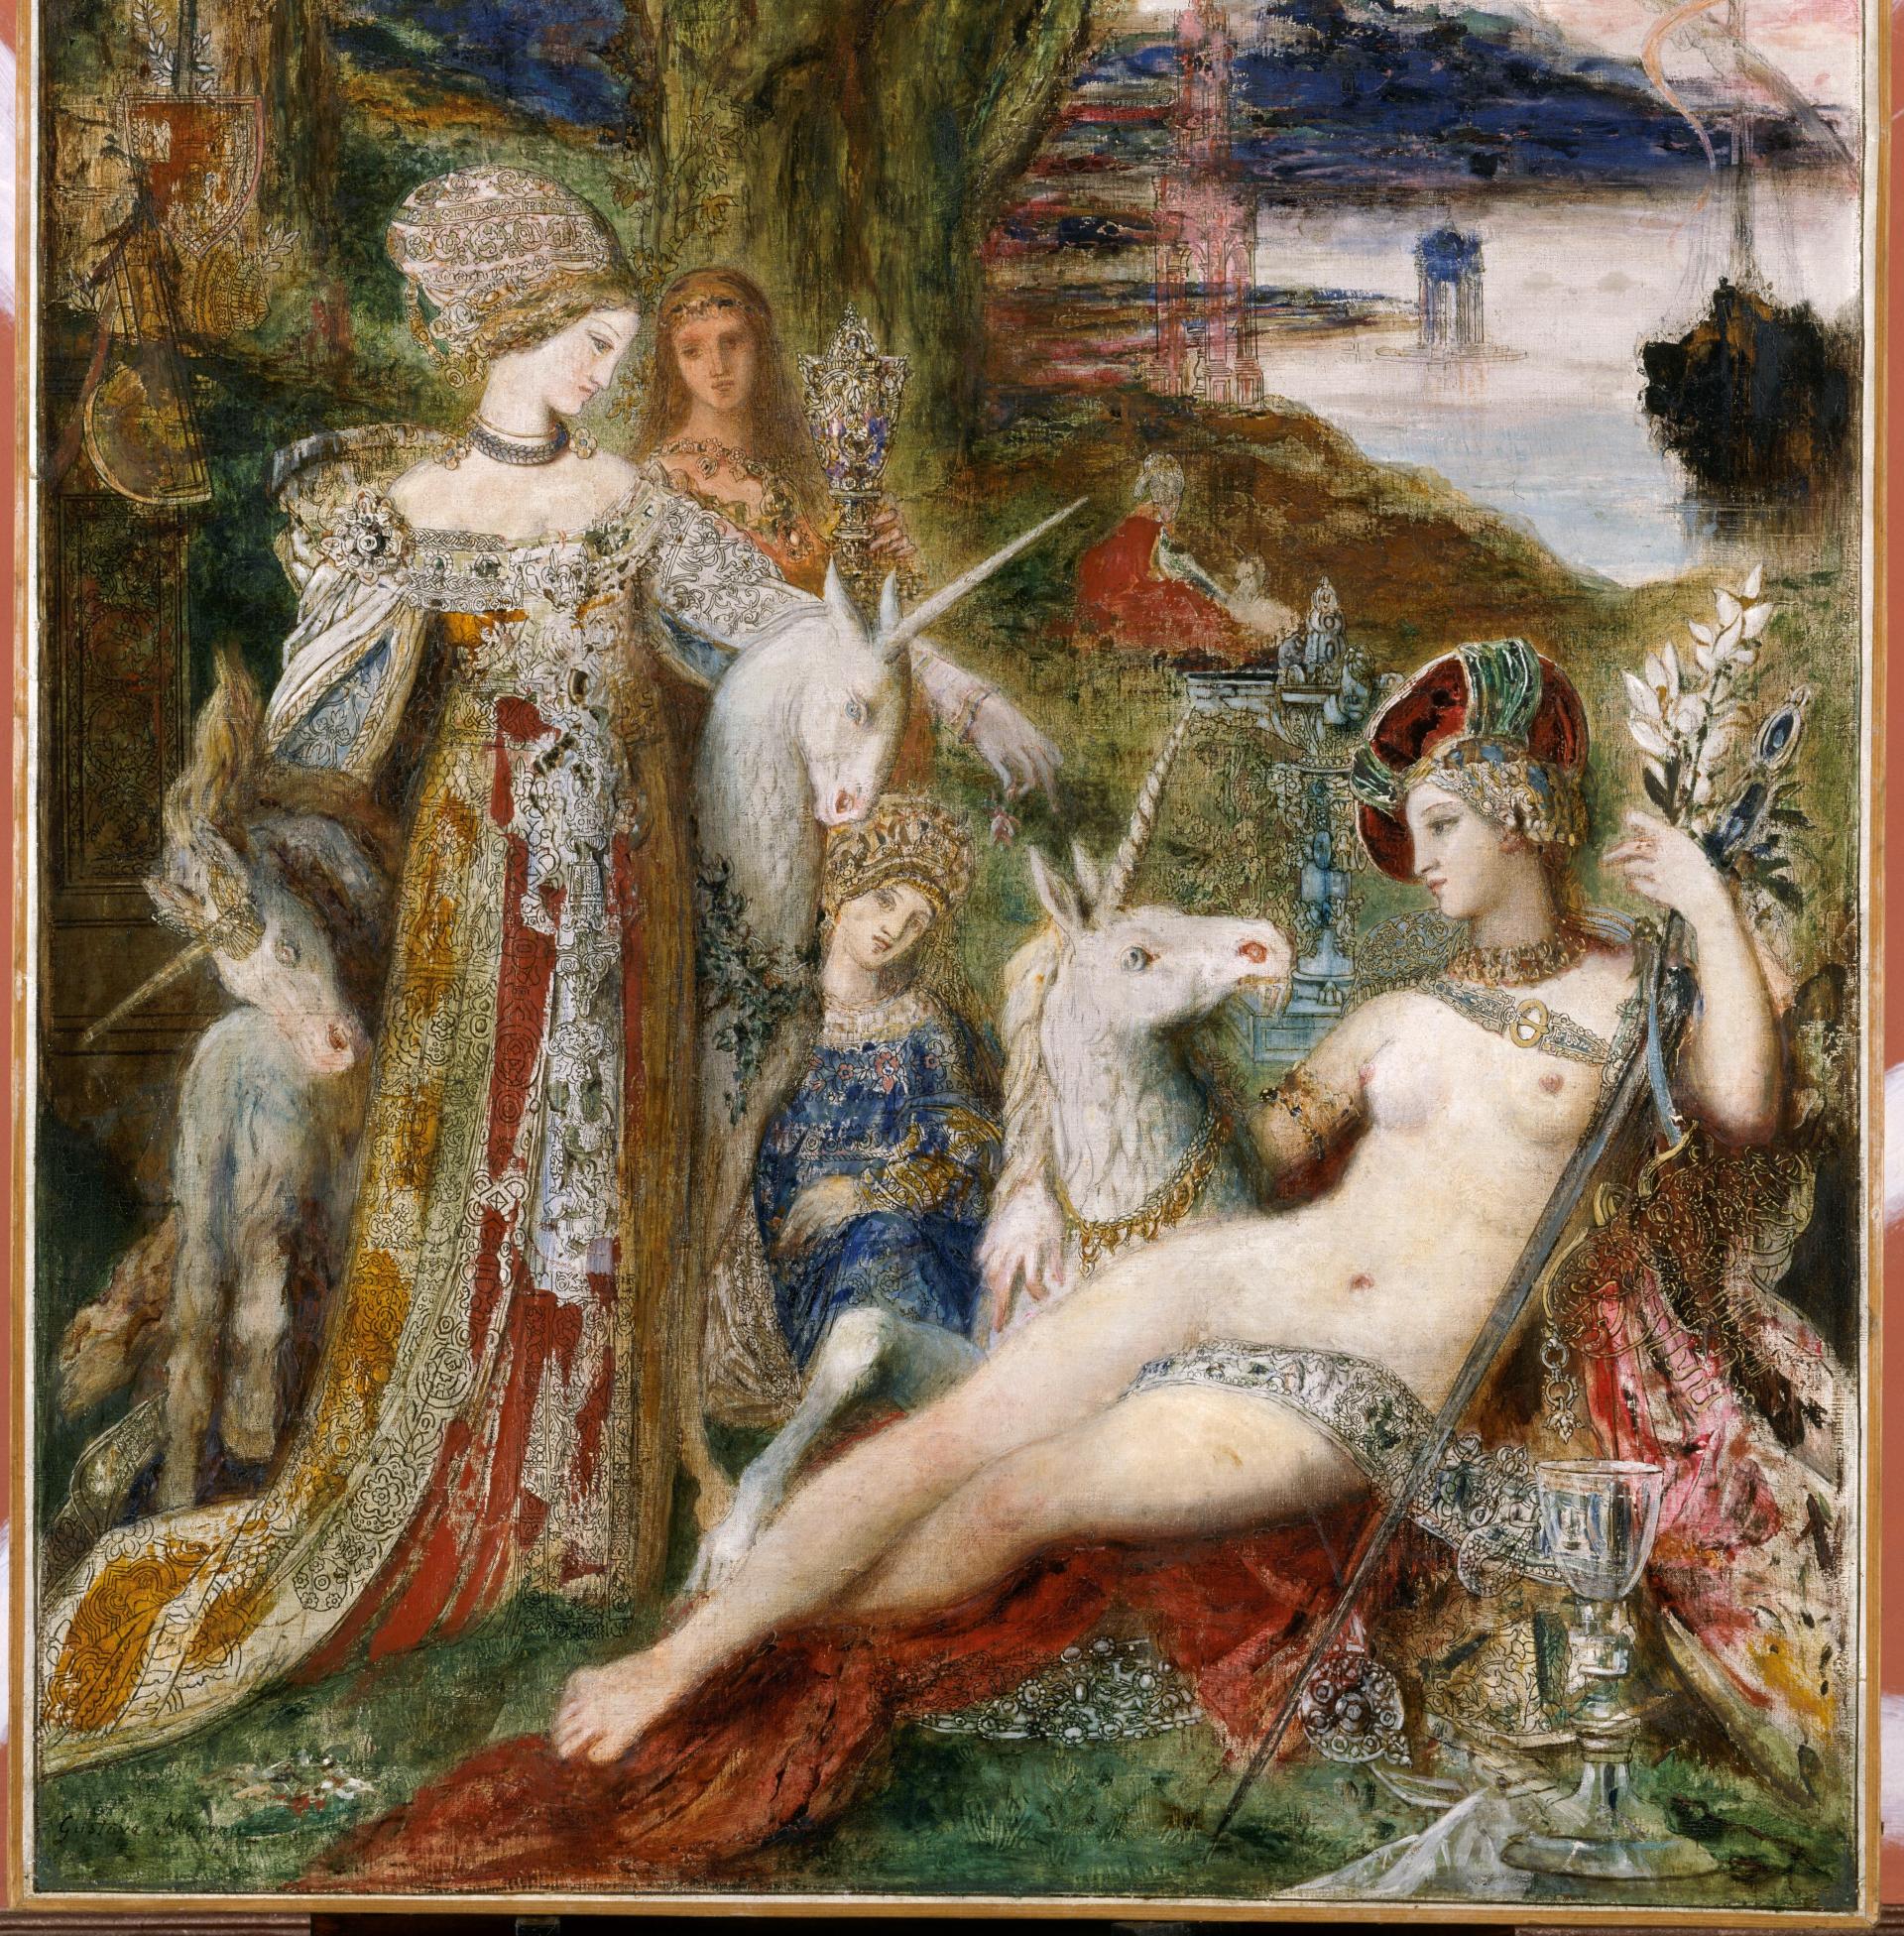 The Art of Gustave Moreau | Musée Gustave Moreau